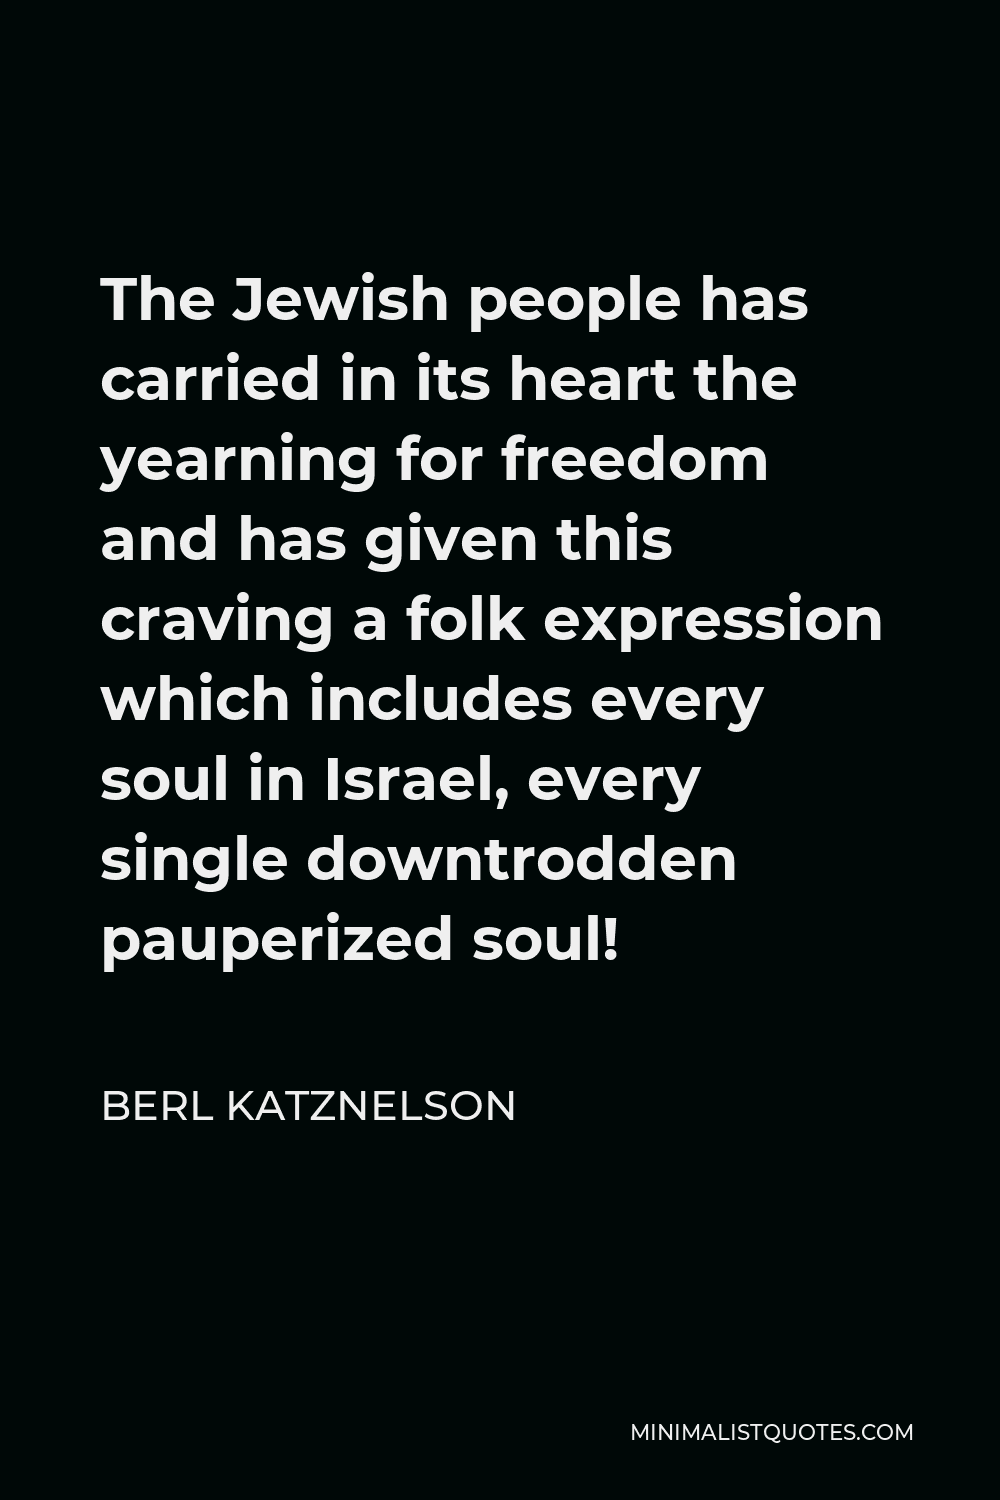 Berl Katznelson Quote - The Jewish people has carried in its heart the yearning for freedom and has given this craving a folk expression which includes every soul in Israel, every single downtrodden pauperized soul!